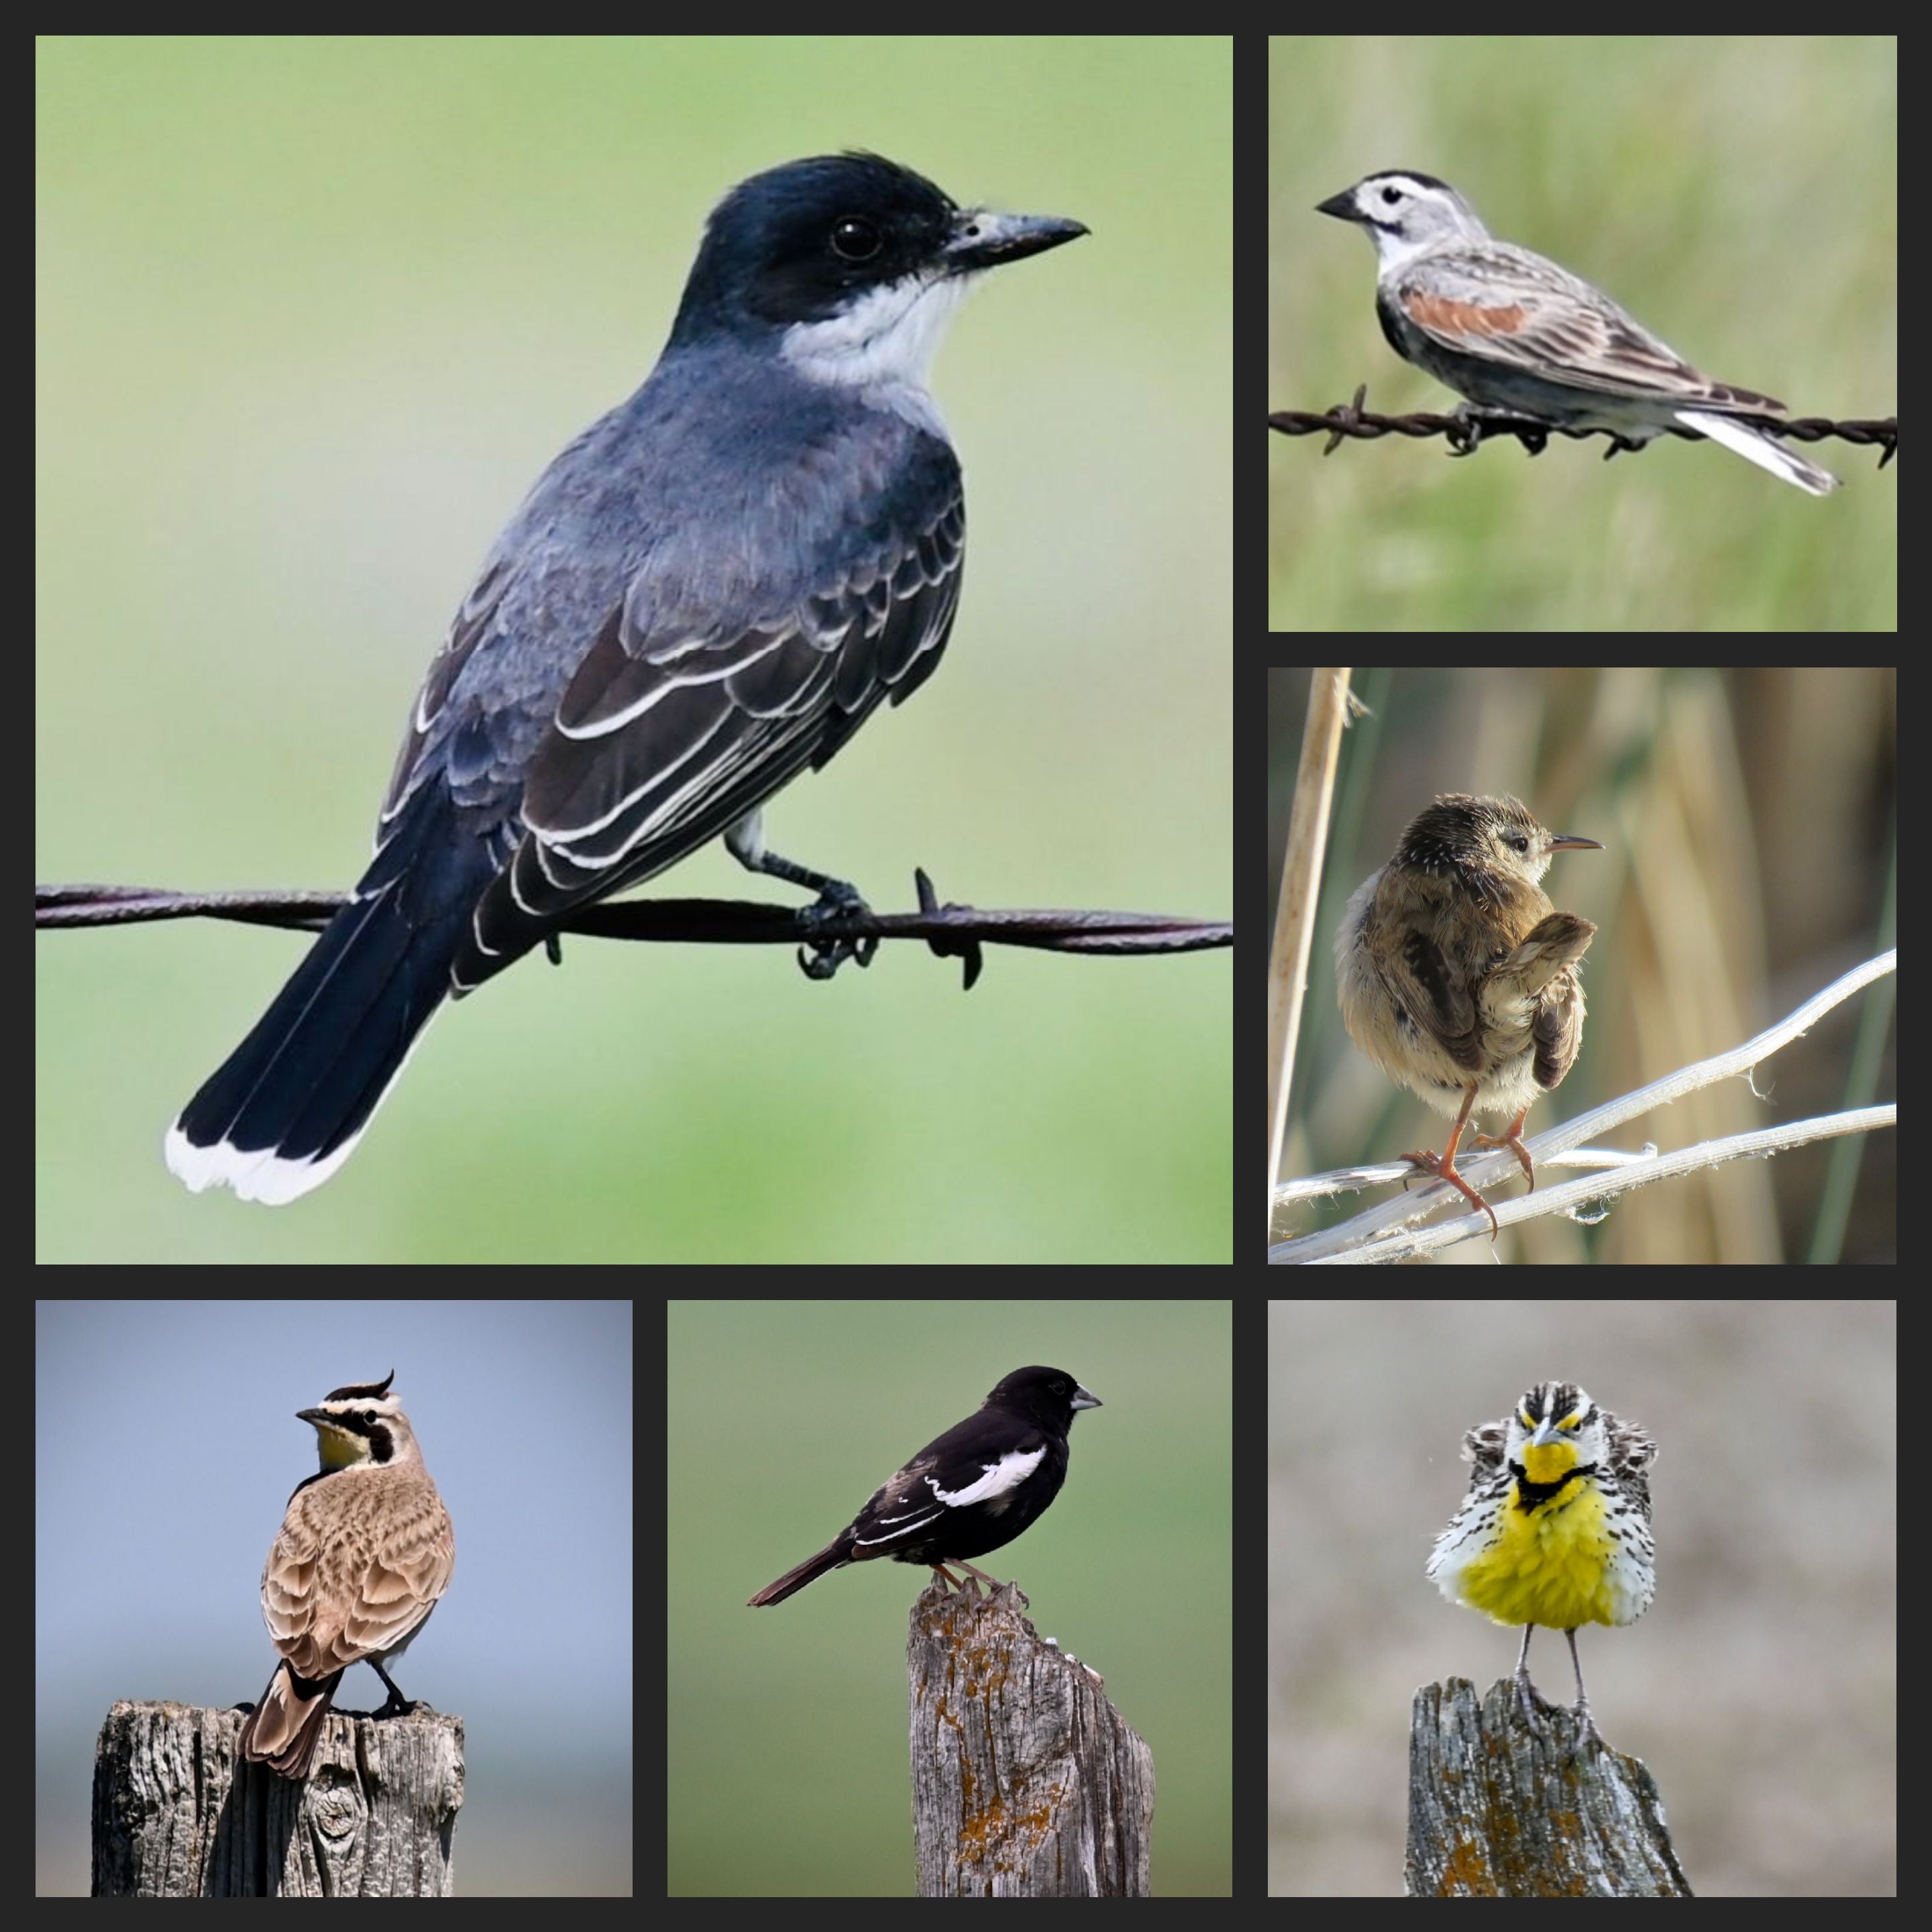 collage image shows multiple grassland songbirds perched on fence posts and wire fencing